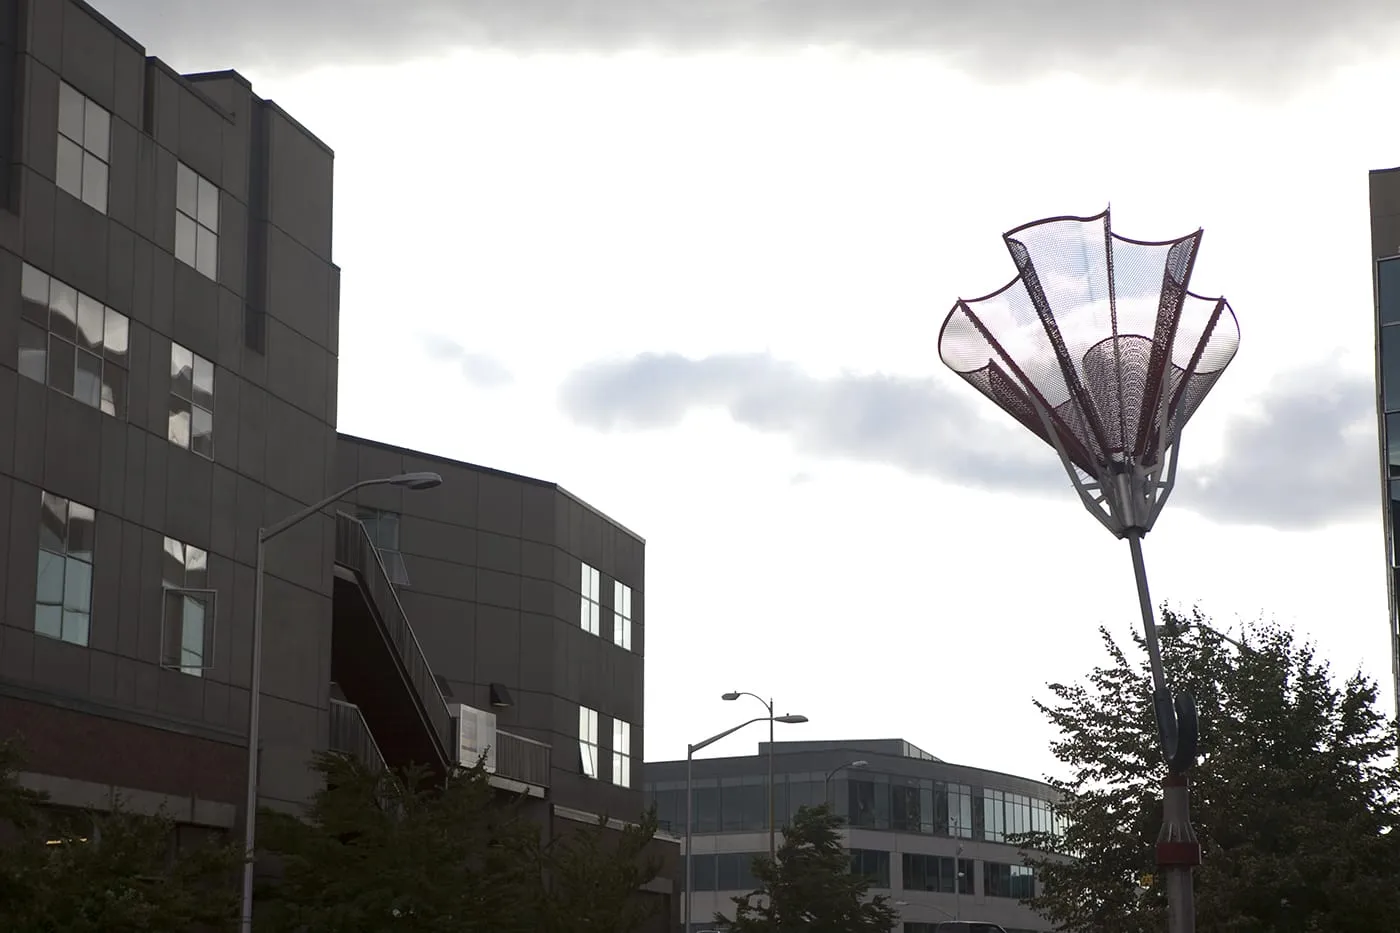 Angie's Umbrella, a sculpture of an upturned umbrella, in Seattle, Washington